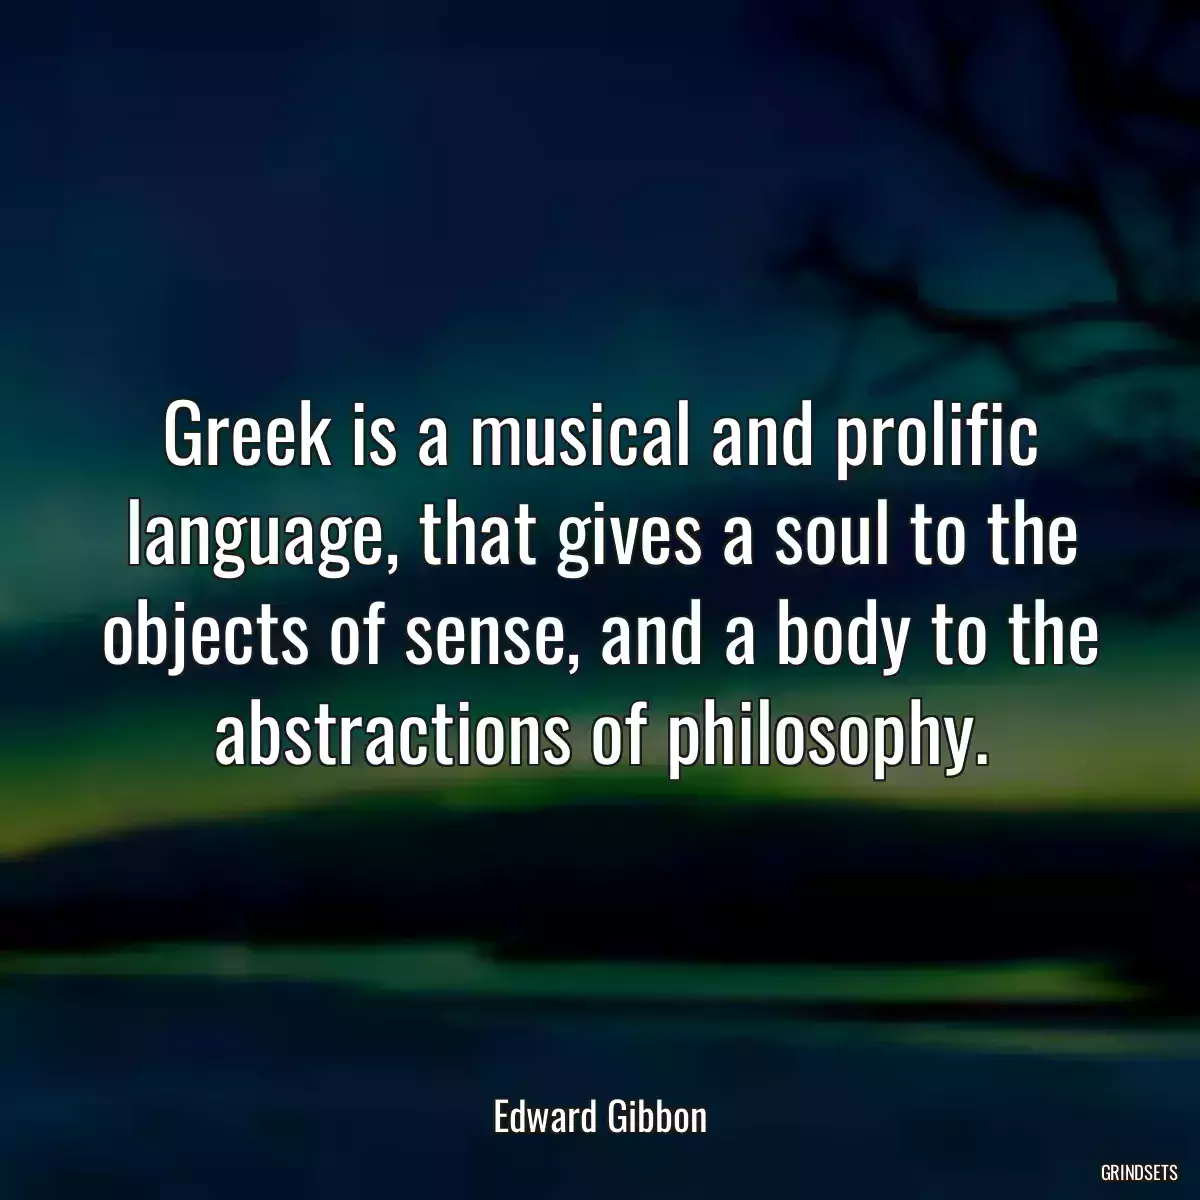 Greek is a musical and prolific language, that gives a soul to the objects of sense, and a body to the abstractions of philosophy.